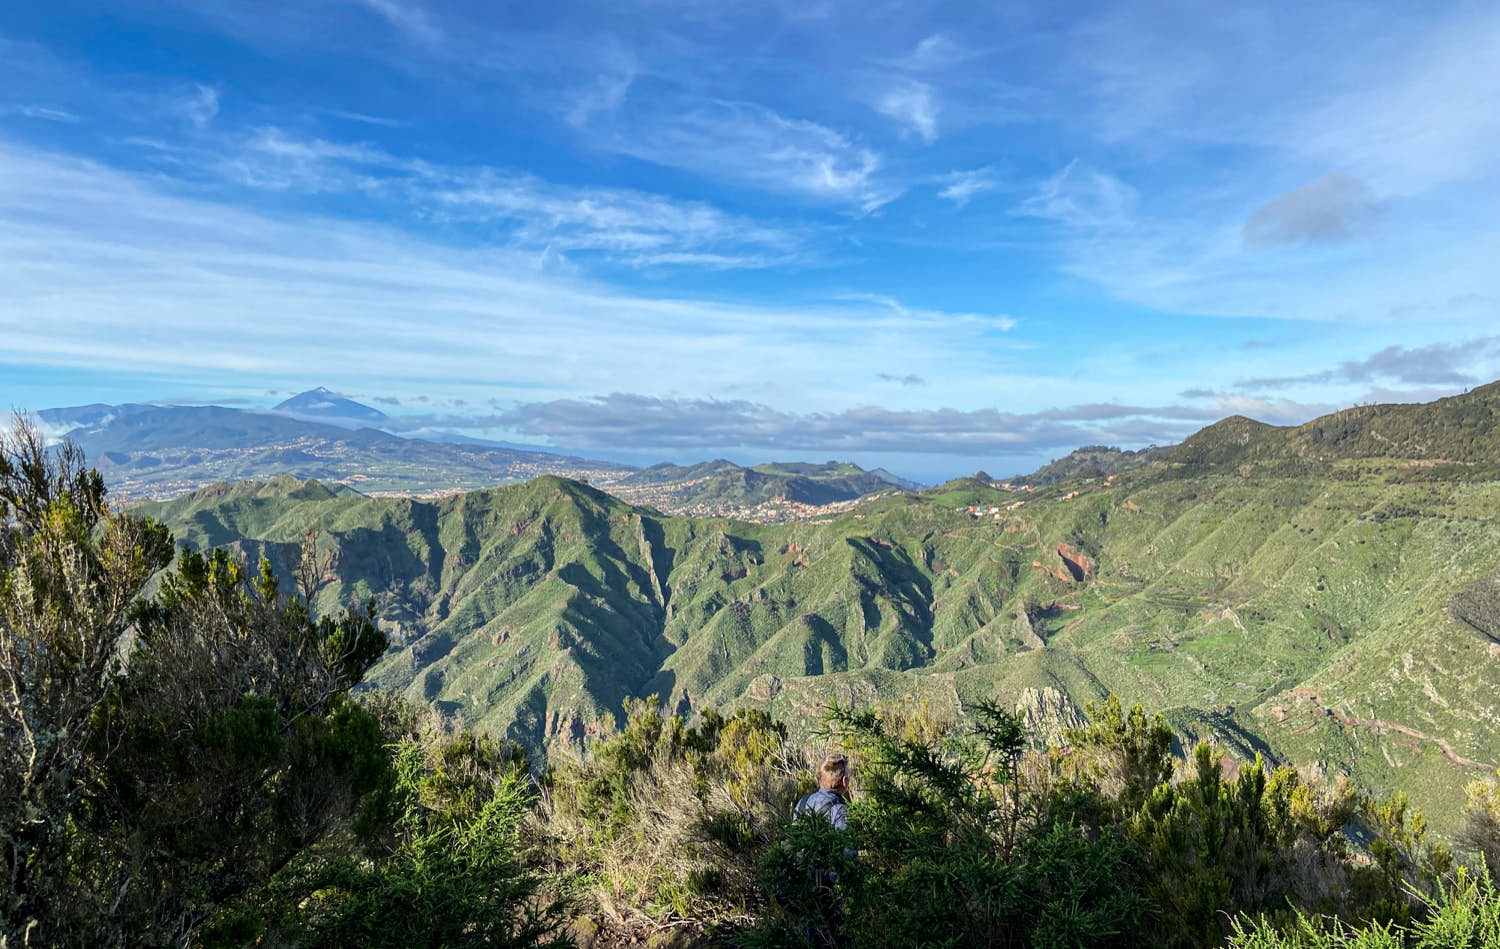 View over the Anaga Heights from the hiking trail - near Pico del Ingles